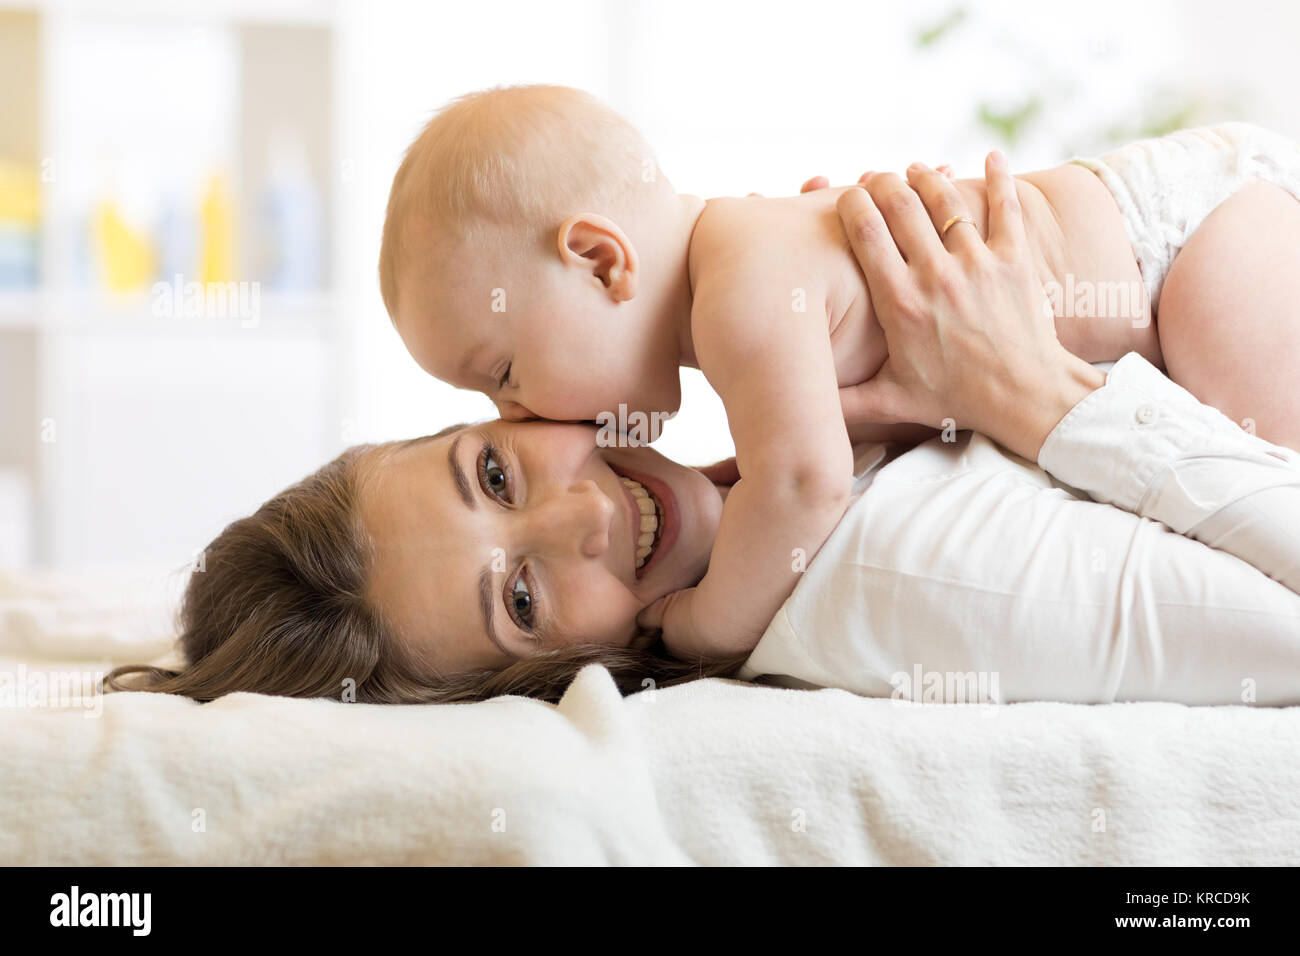 Adorable baby kissing his mother Stock Photo